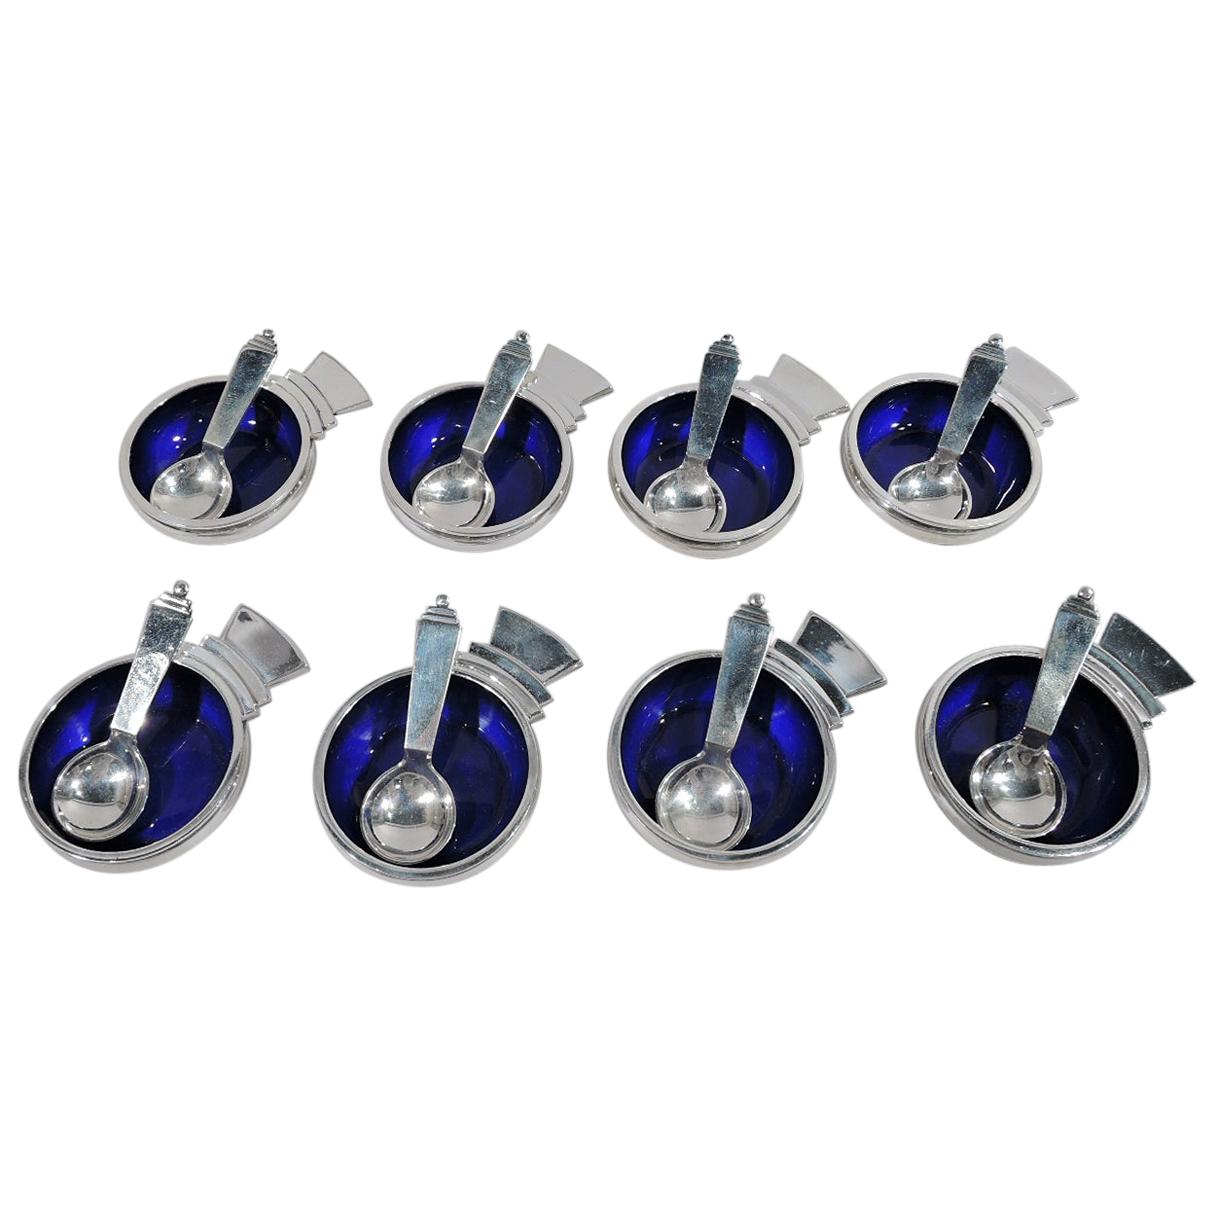 Set of 8 Georg Jensen Pyramid Sterling Silver and Enamel Open Salts and Spoons